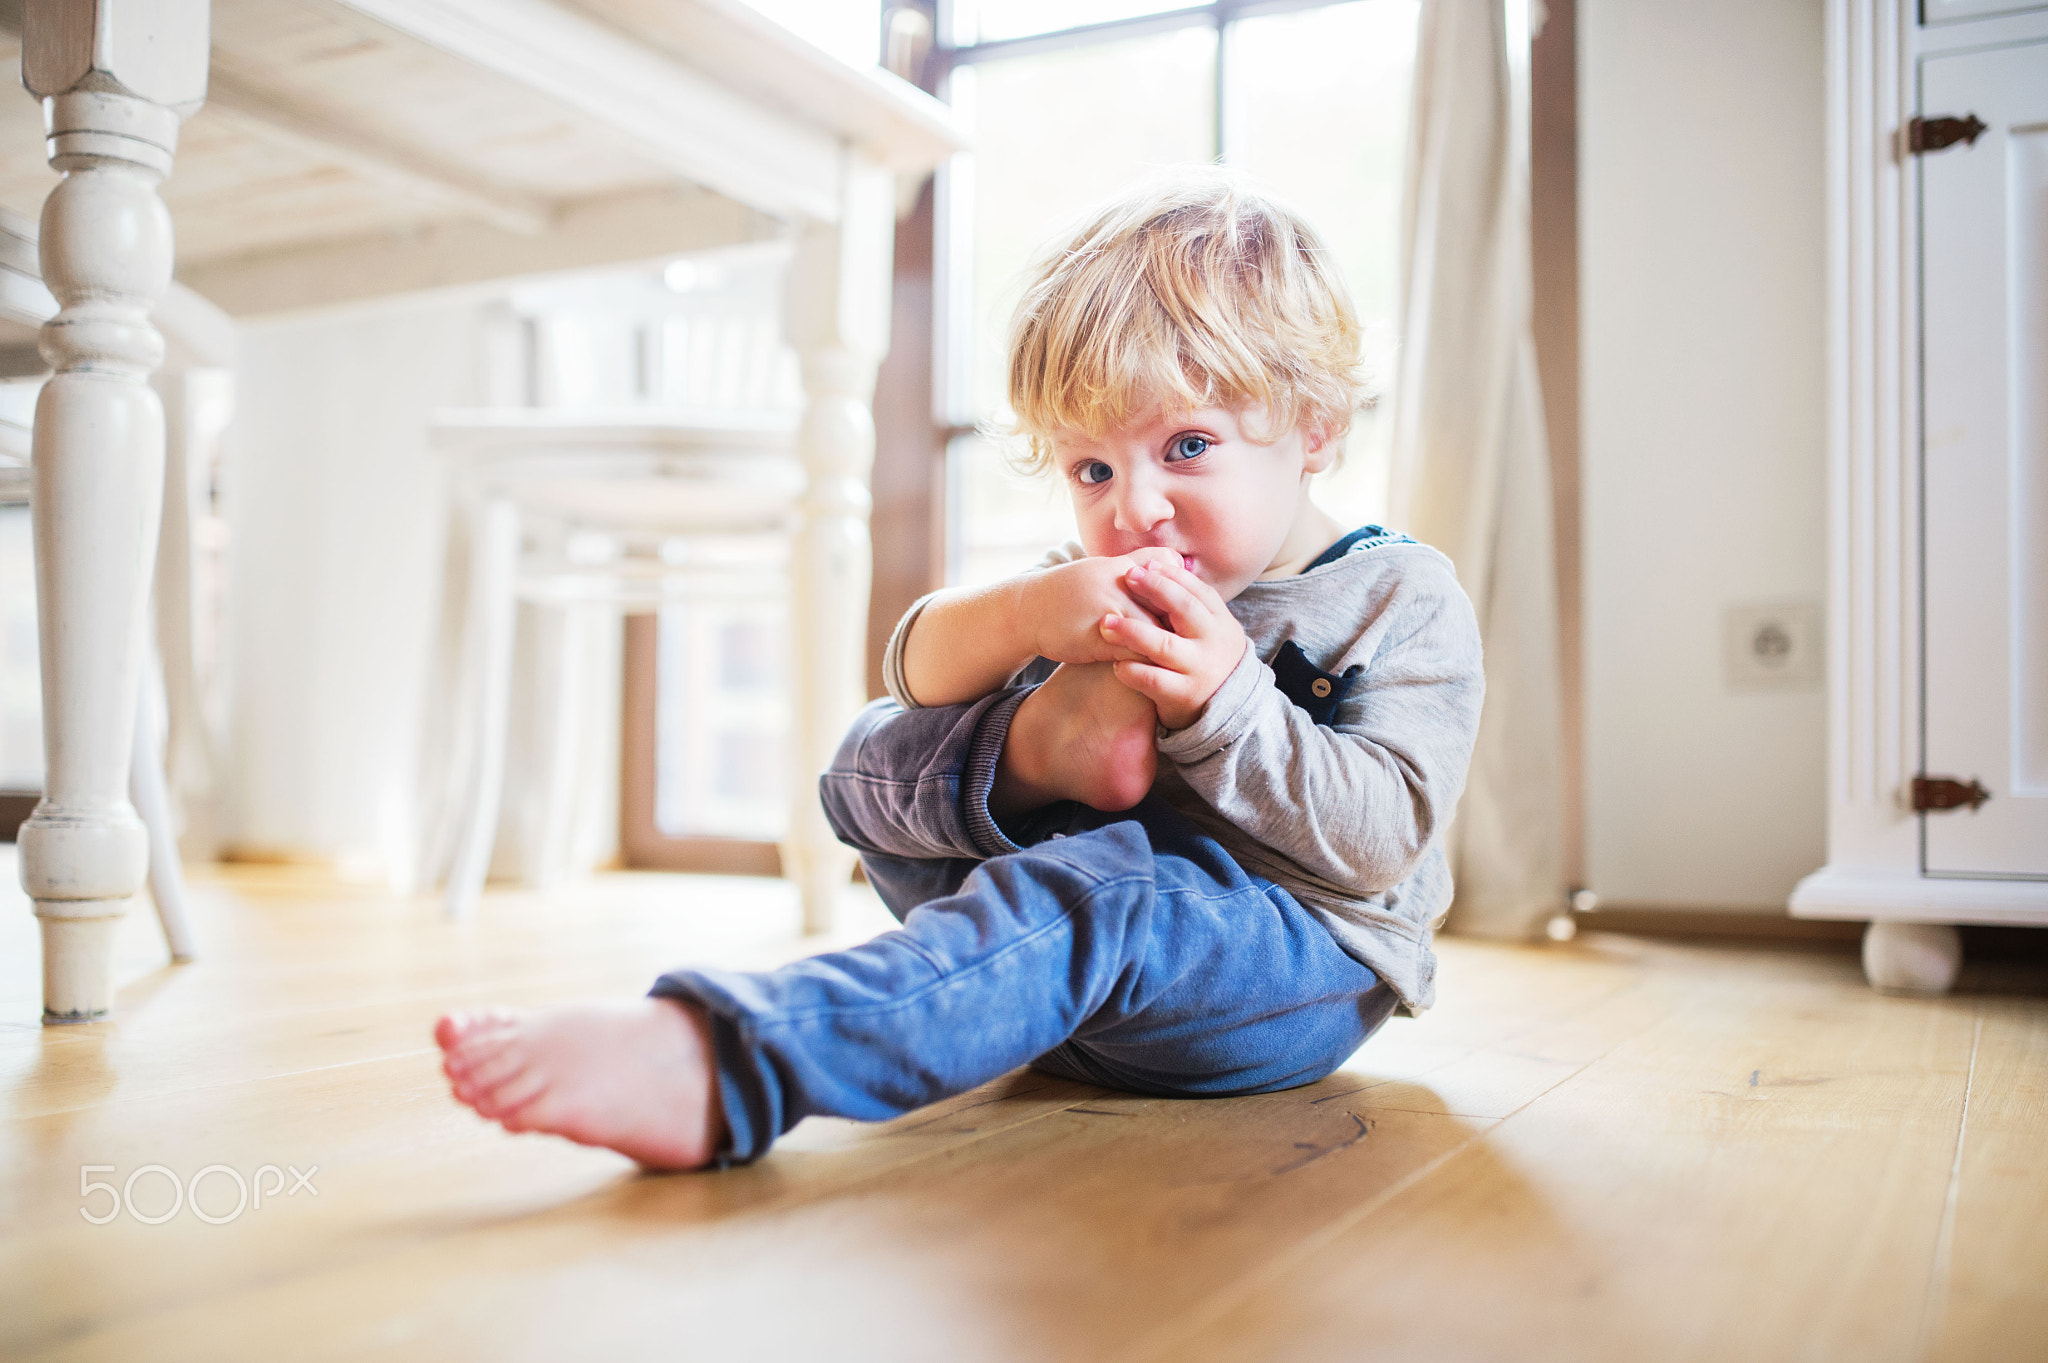 A toddler boy sitting on the floor at home.